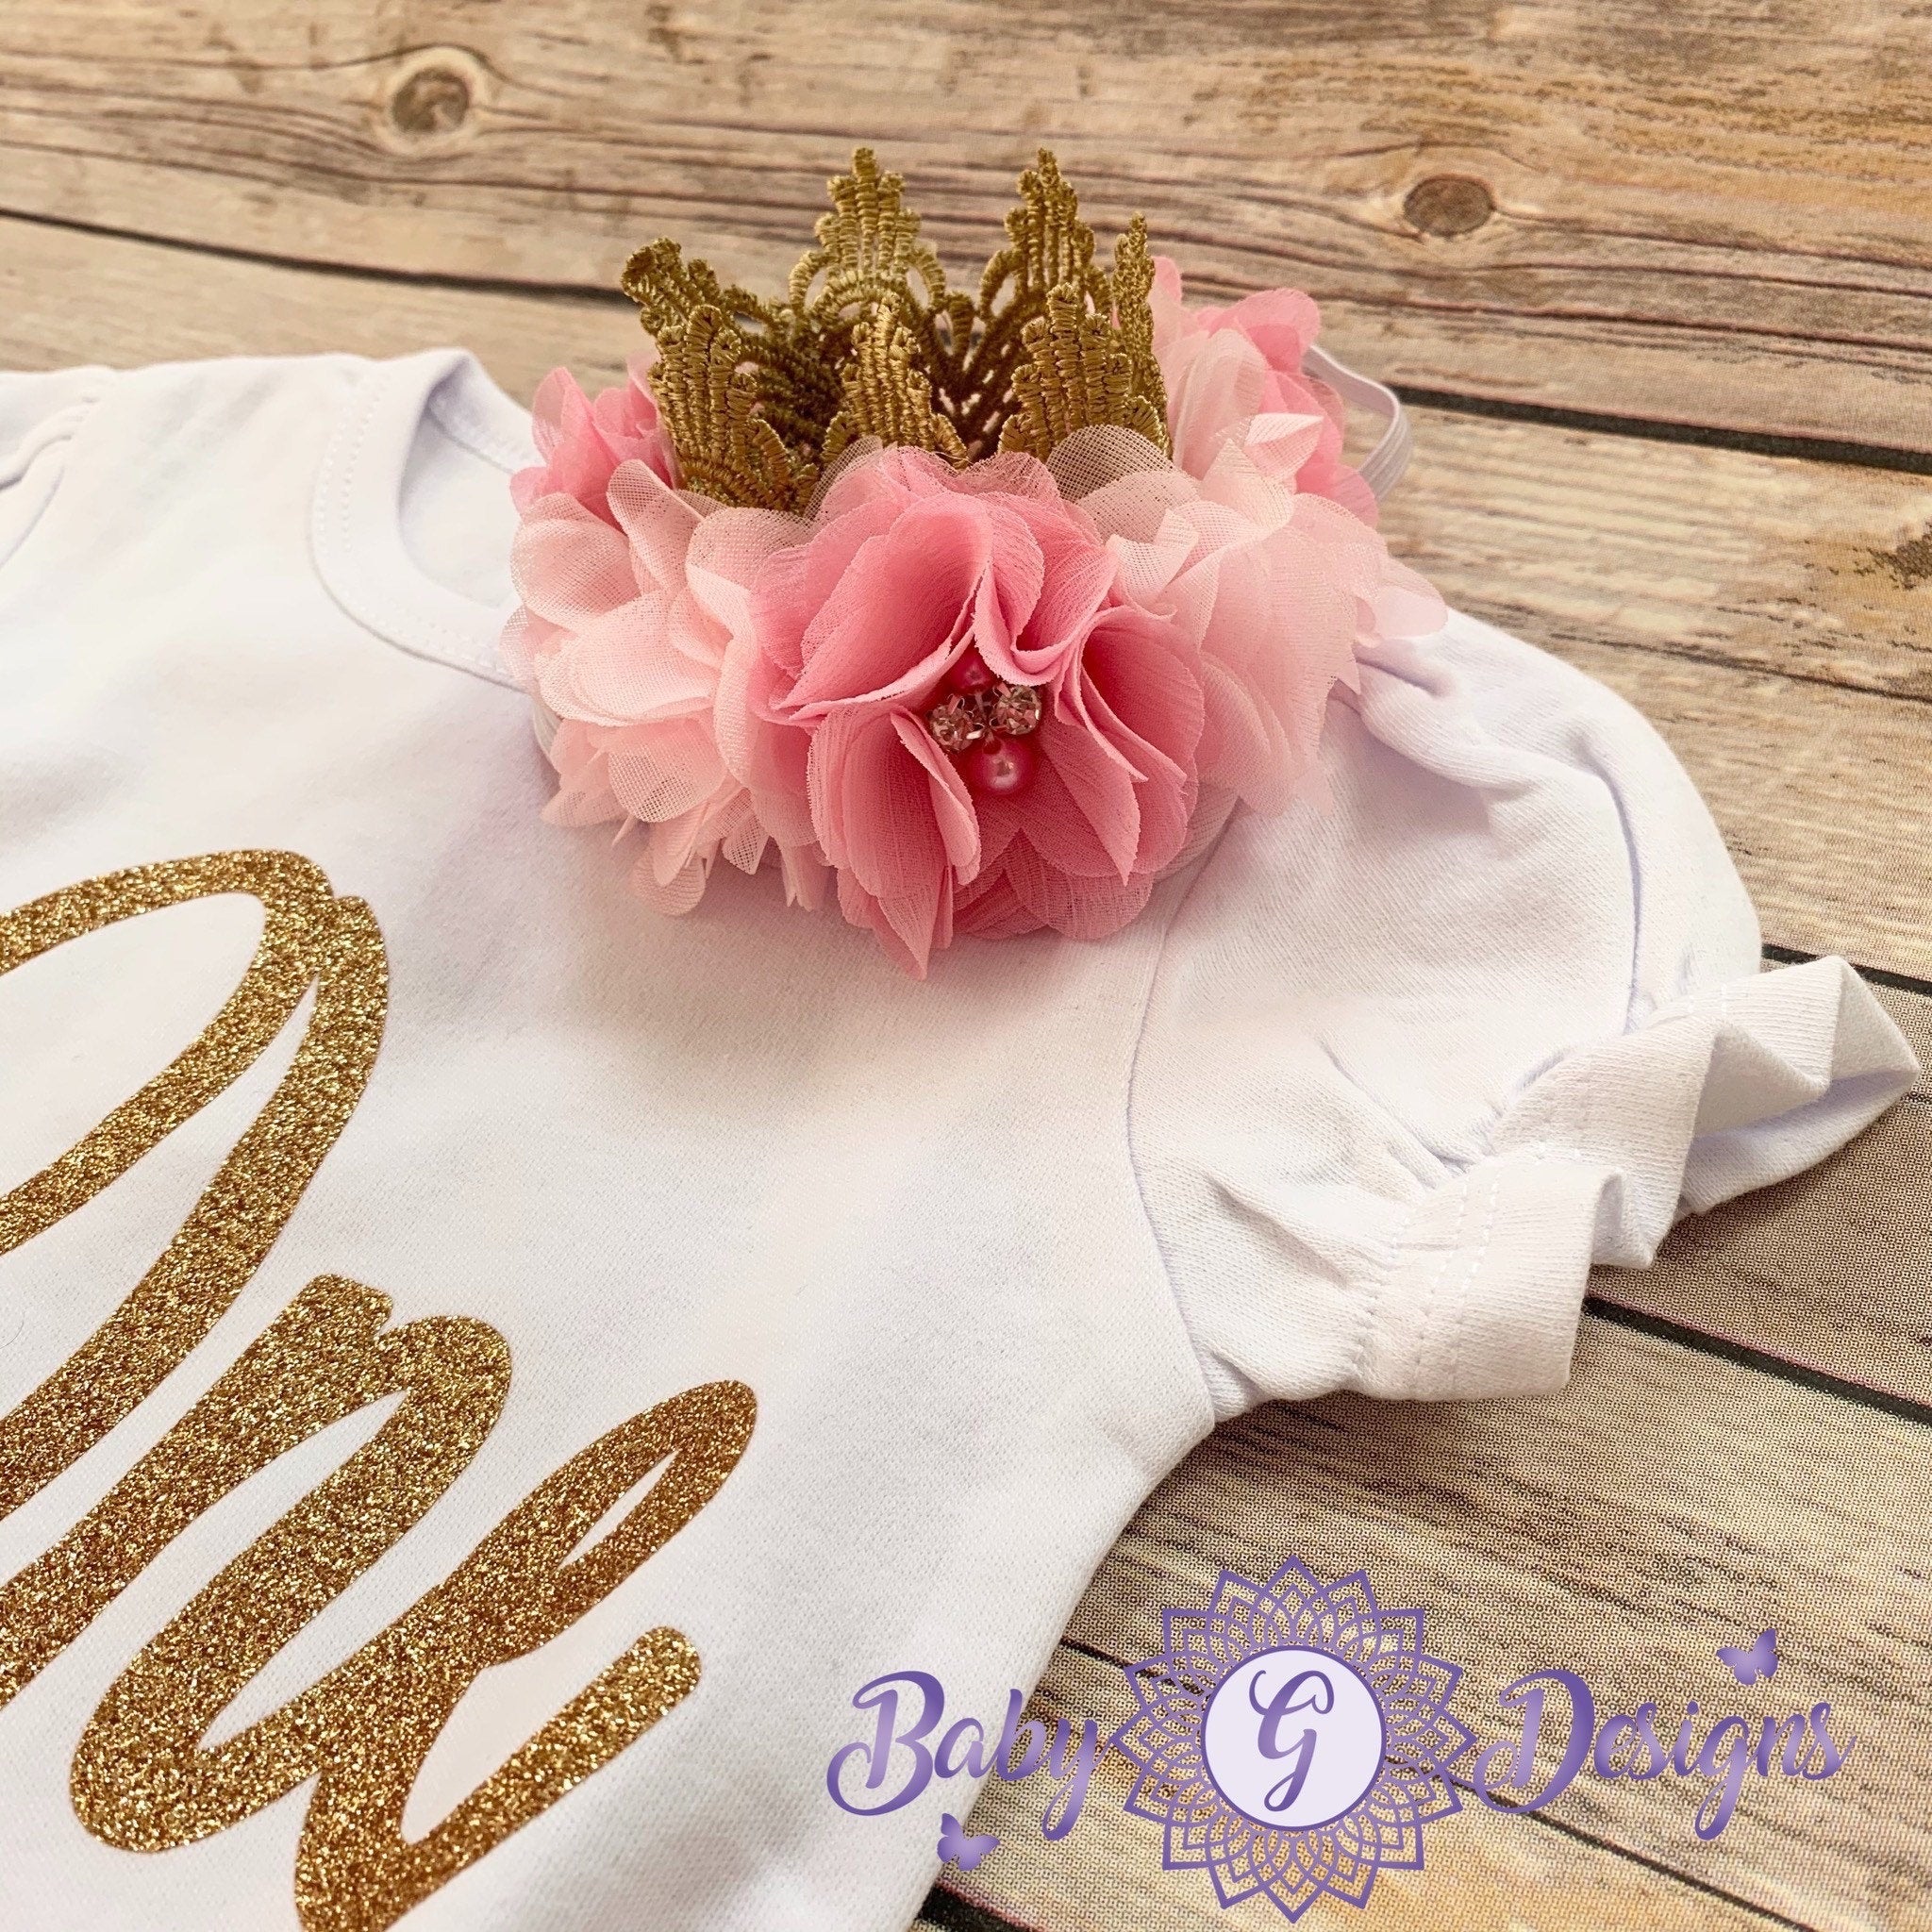 1st birthday outfit-gold